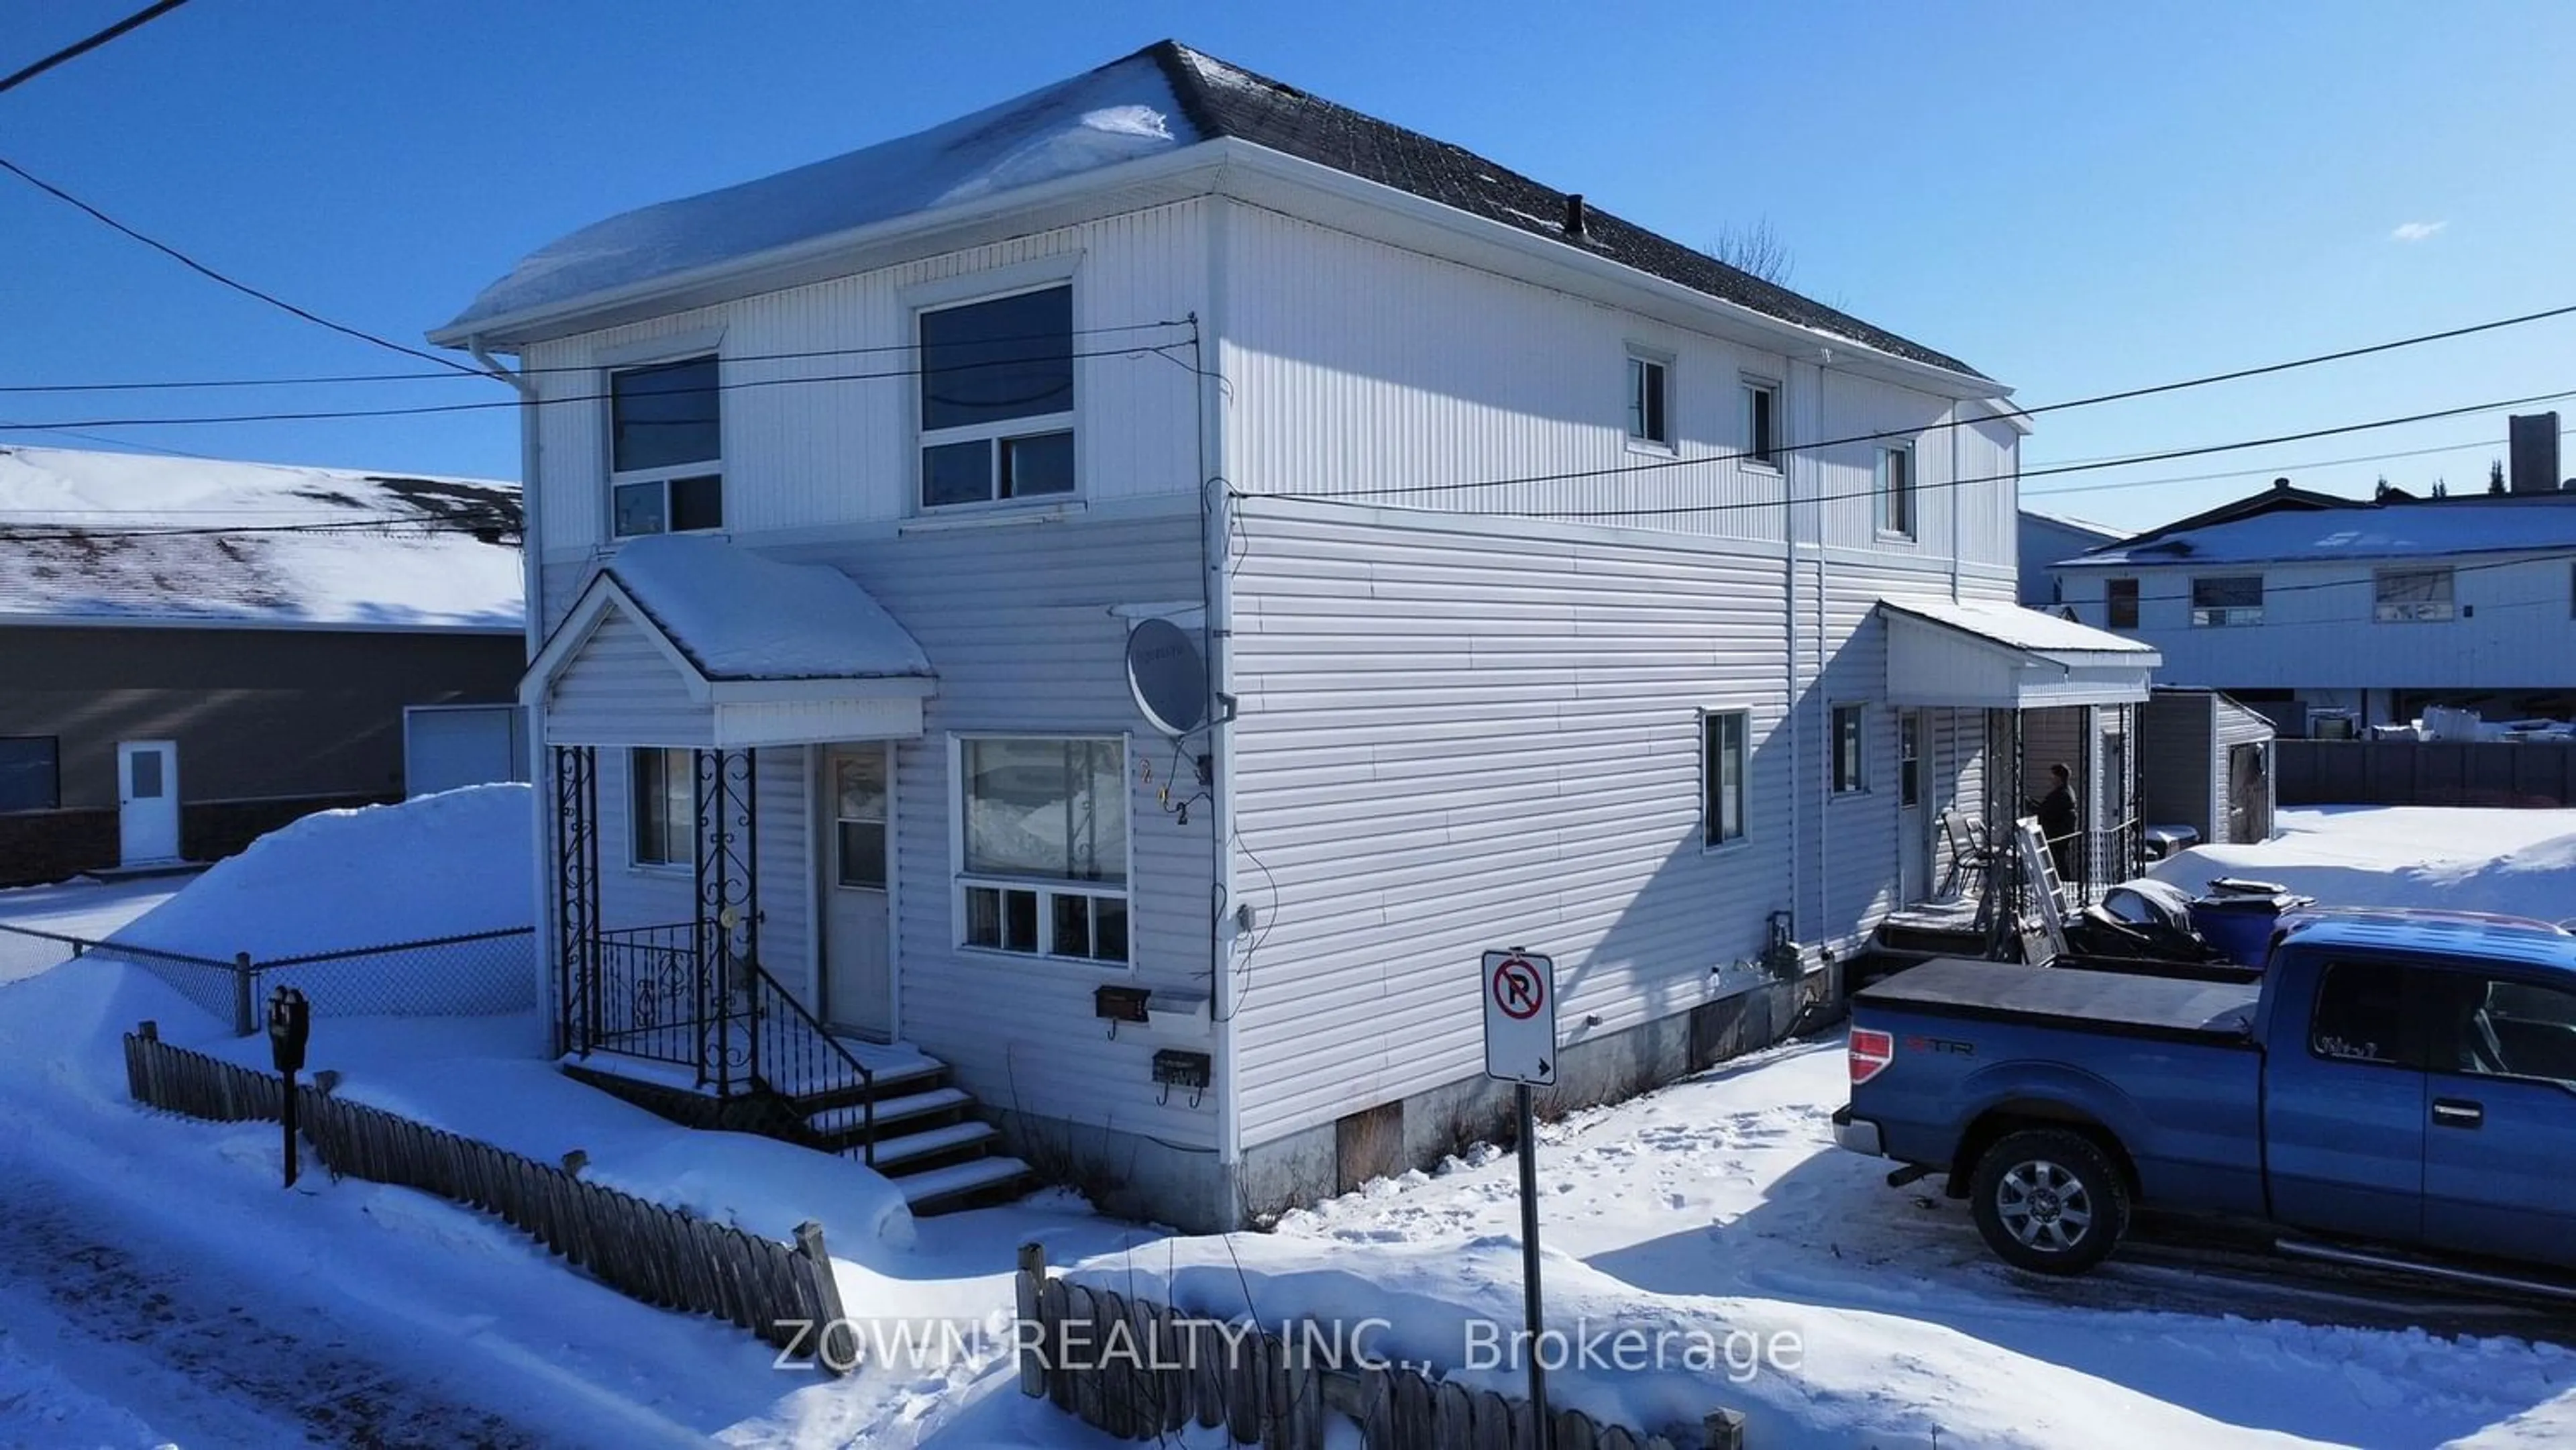 A pic from exterior of the house or condo for 242-244 248 Cedar St, Timmins Ontario P4N 2H1